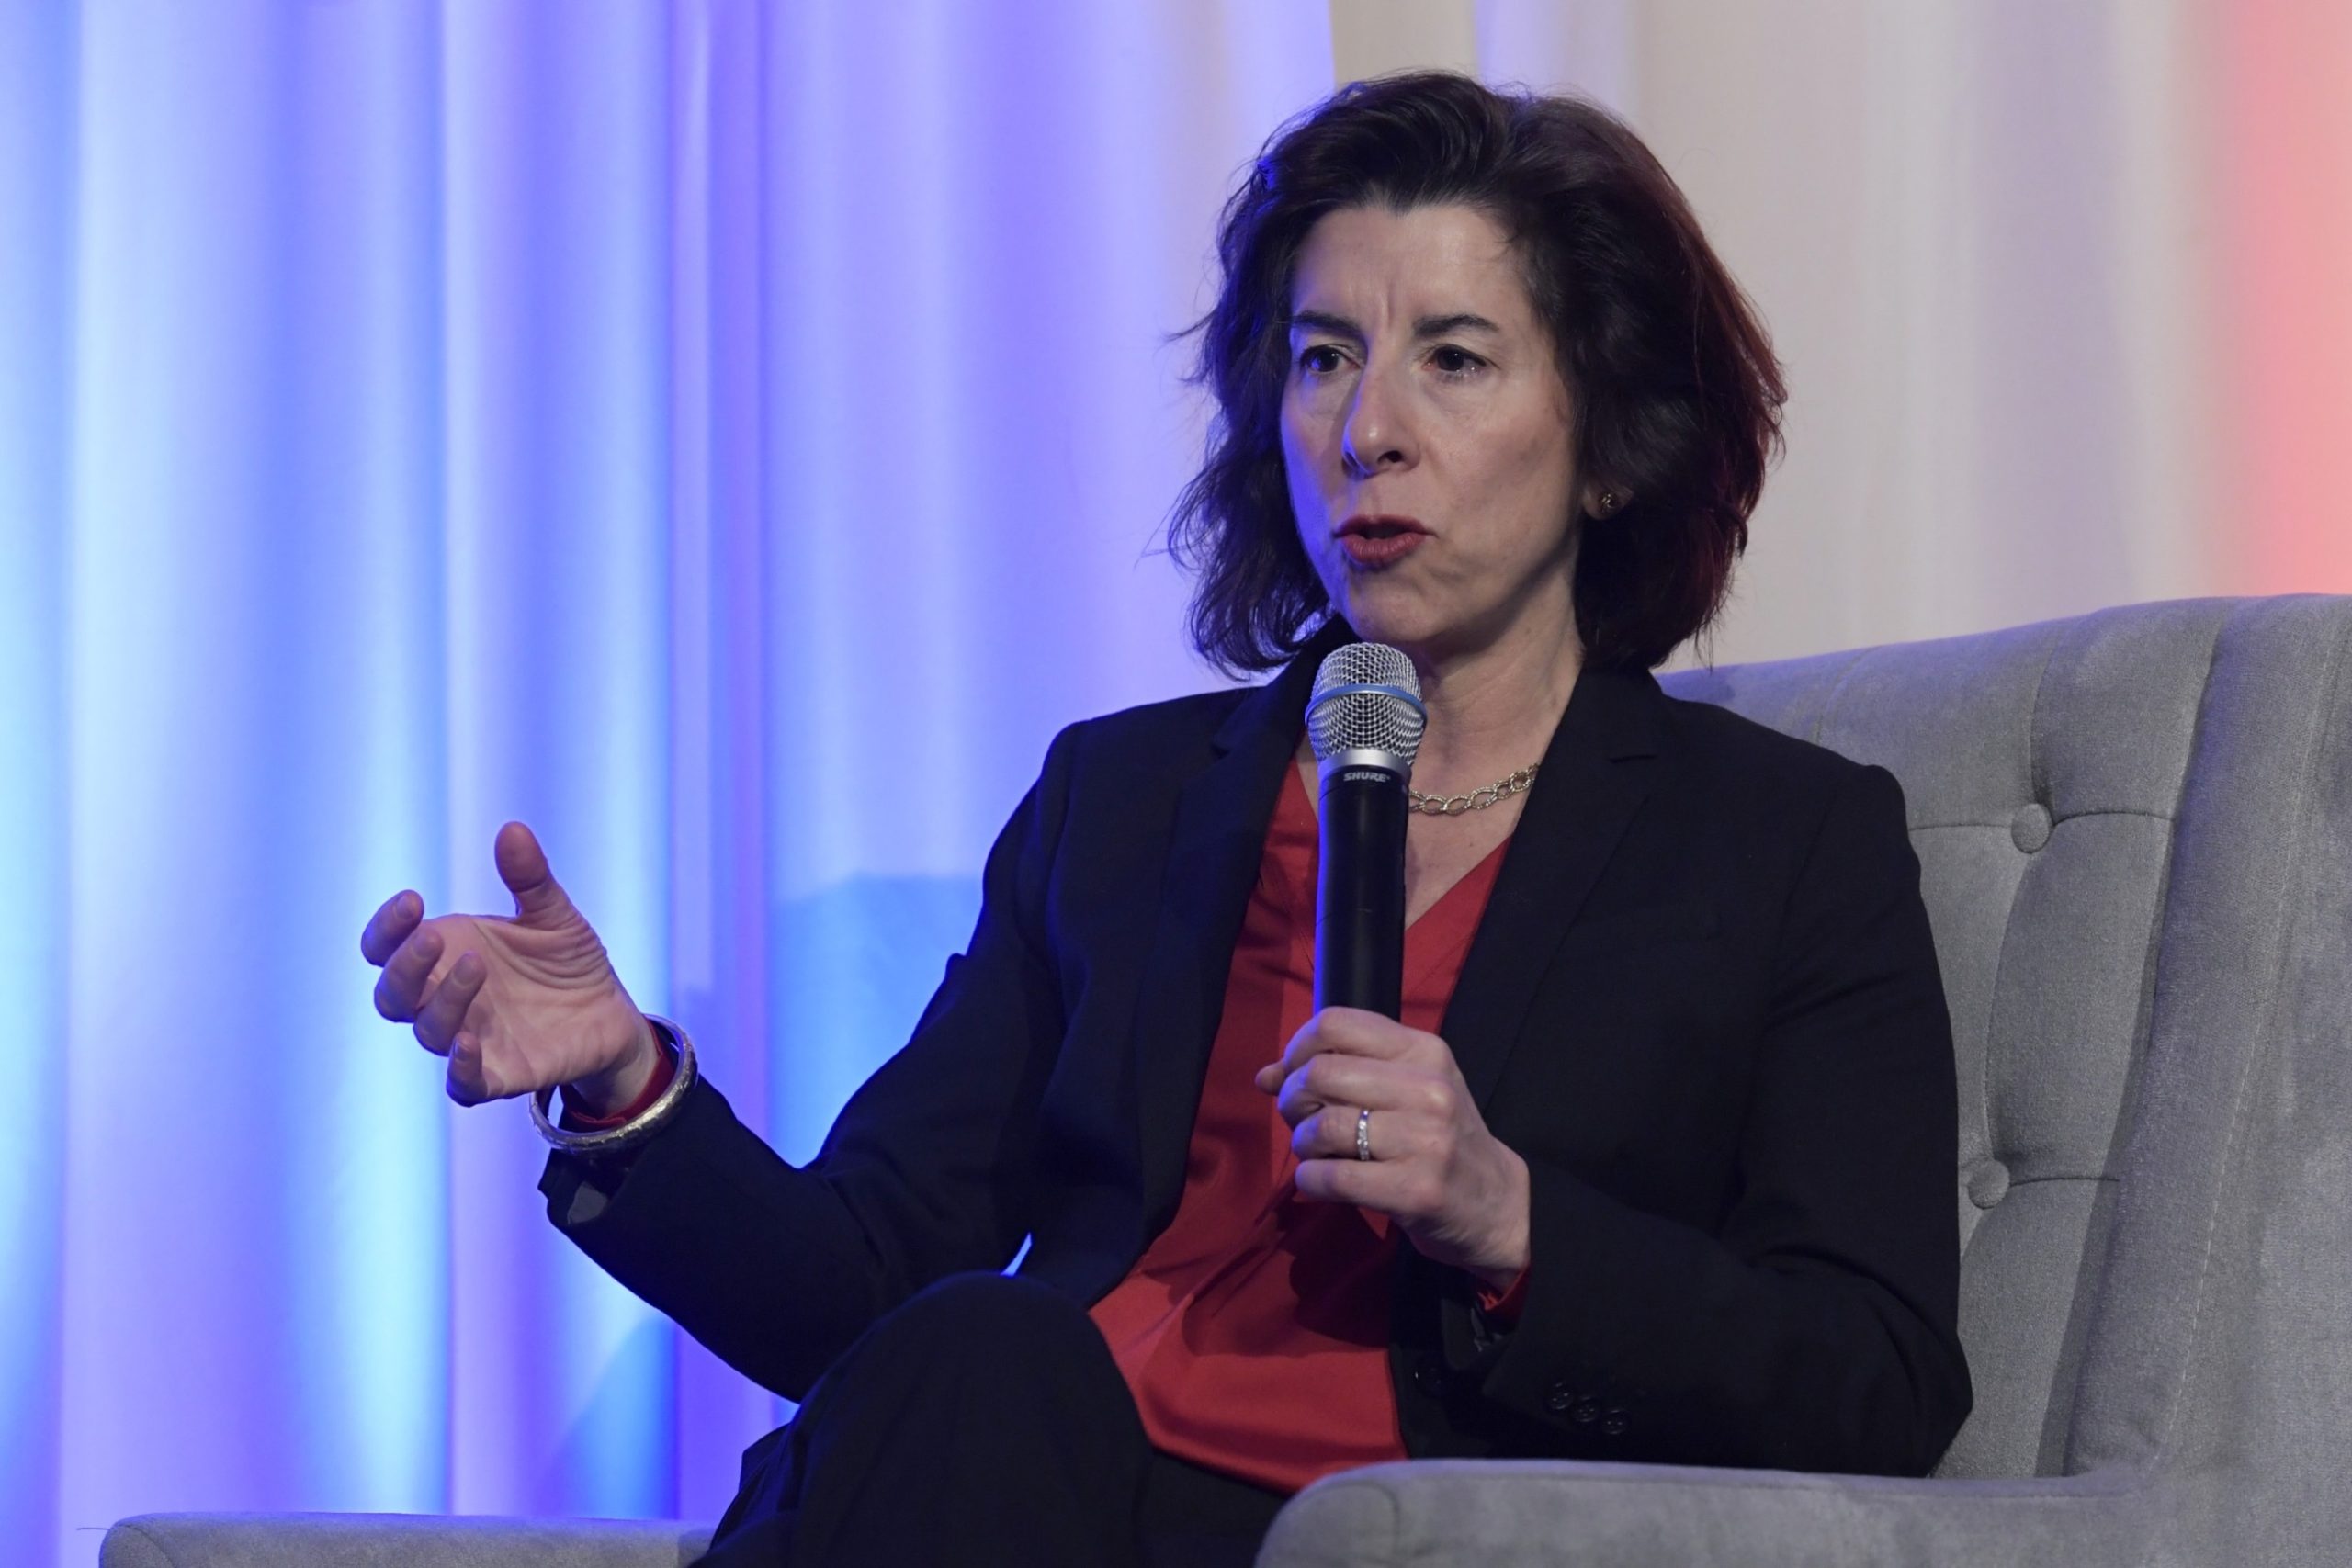 Progress Made with Sanctions on Russia, but Further Action Needed, Says Commerce Secretary Gina Raimondo